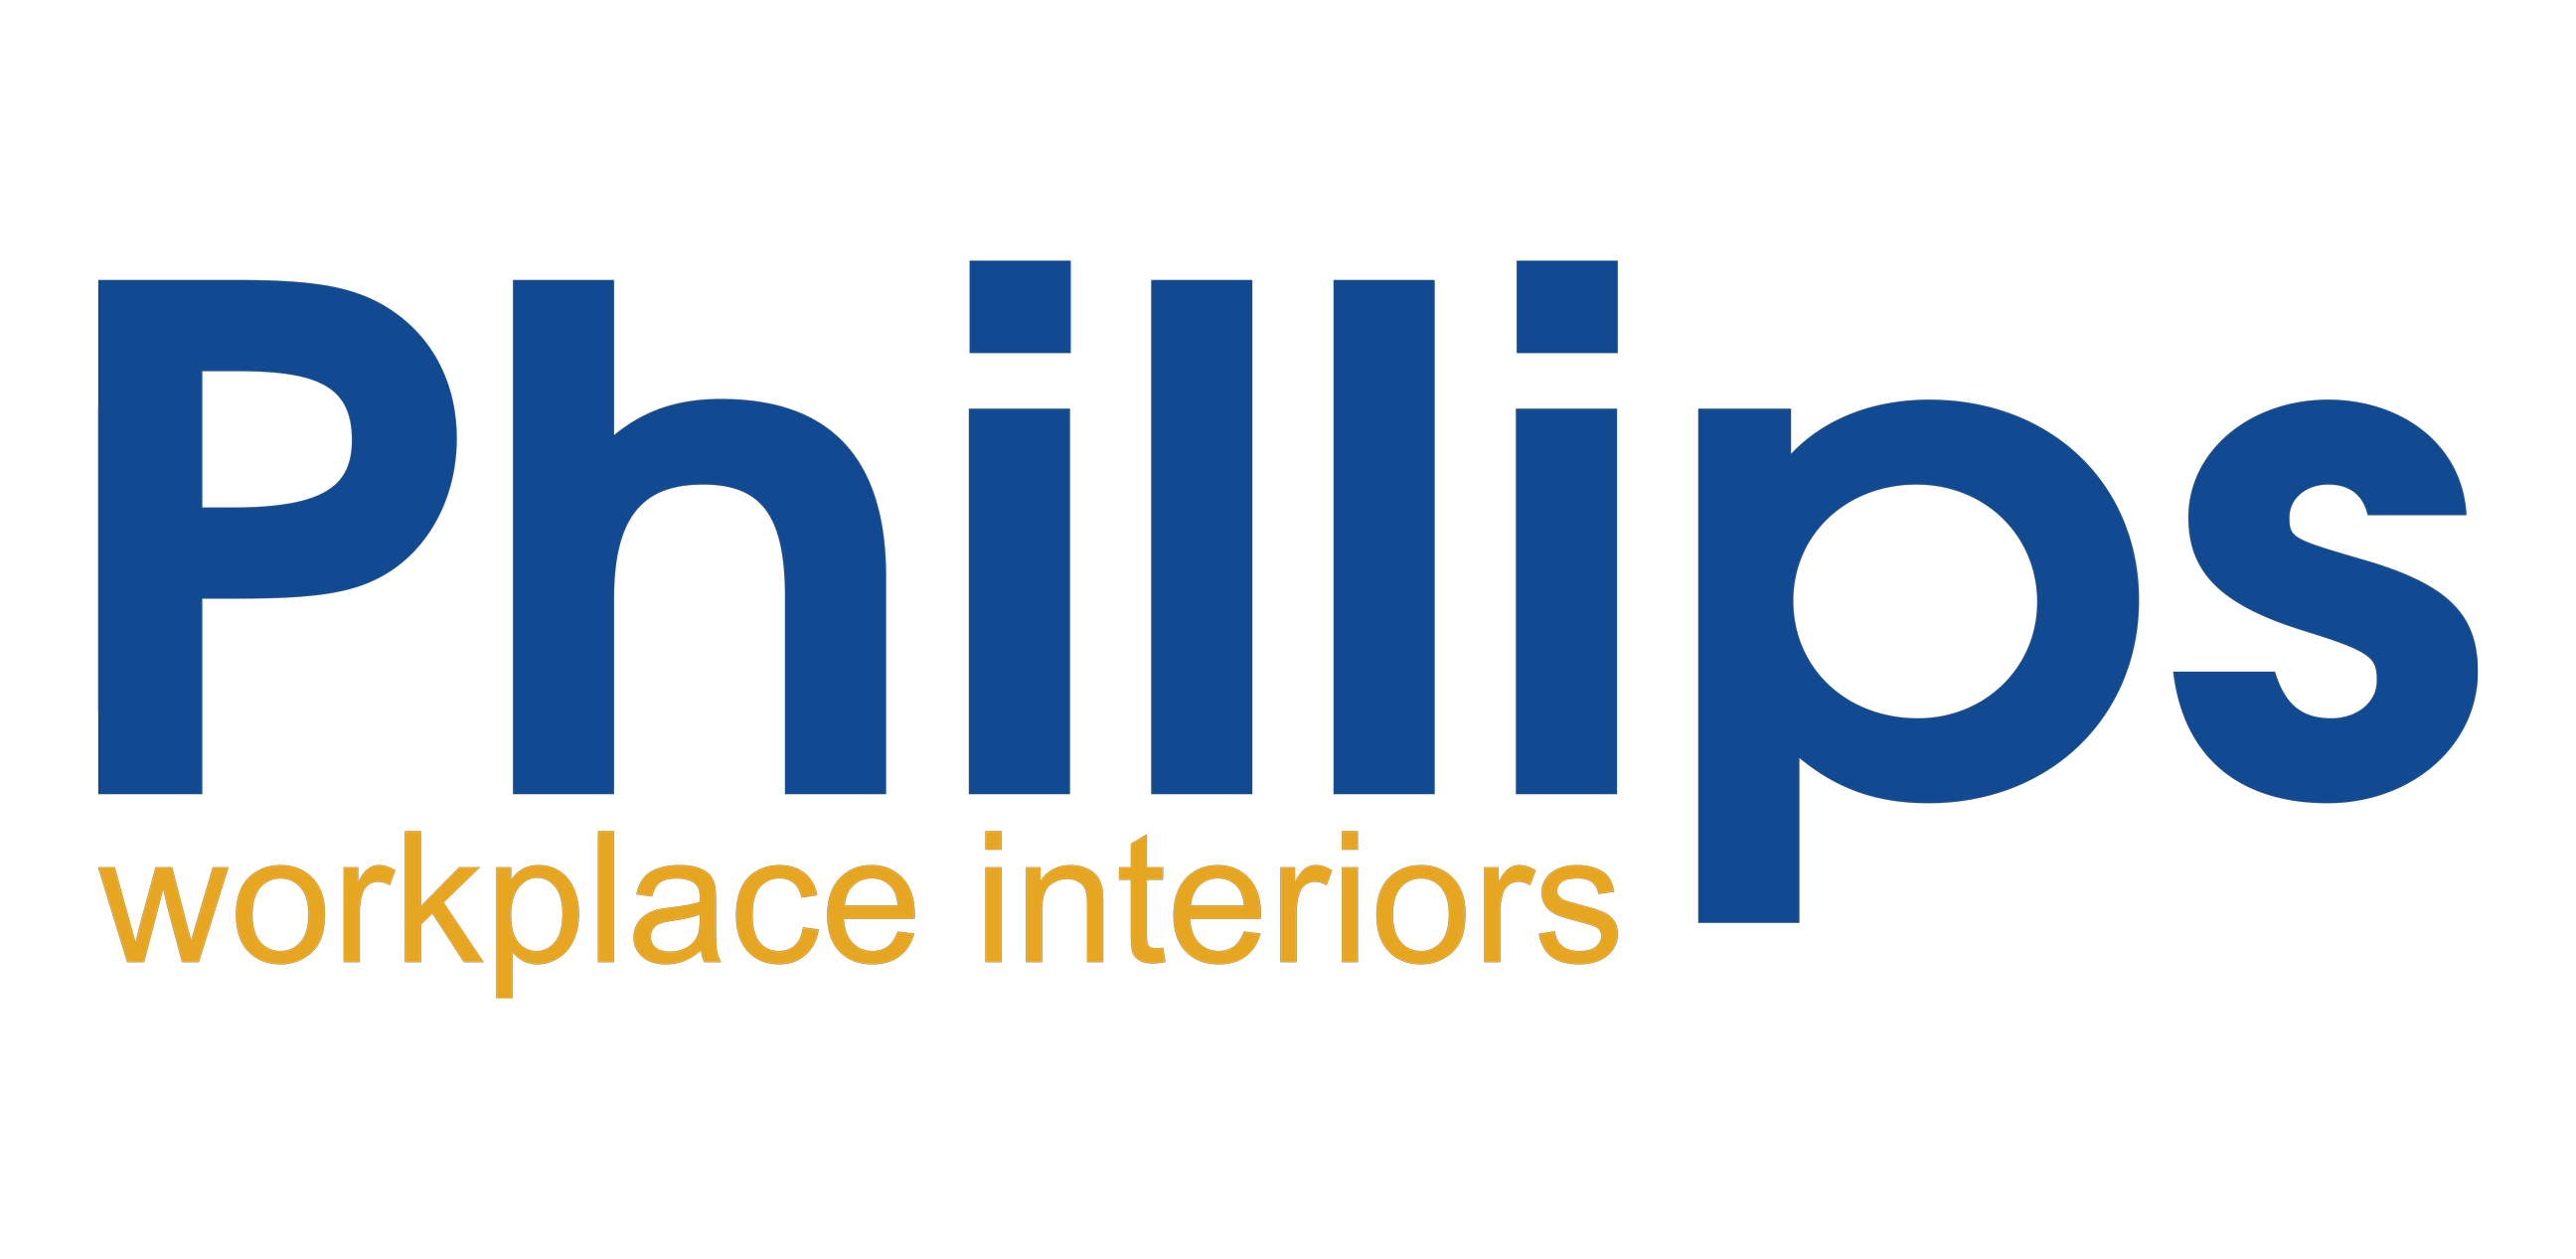 Phillips Workplace Interiors – Hagerstown MD